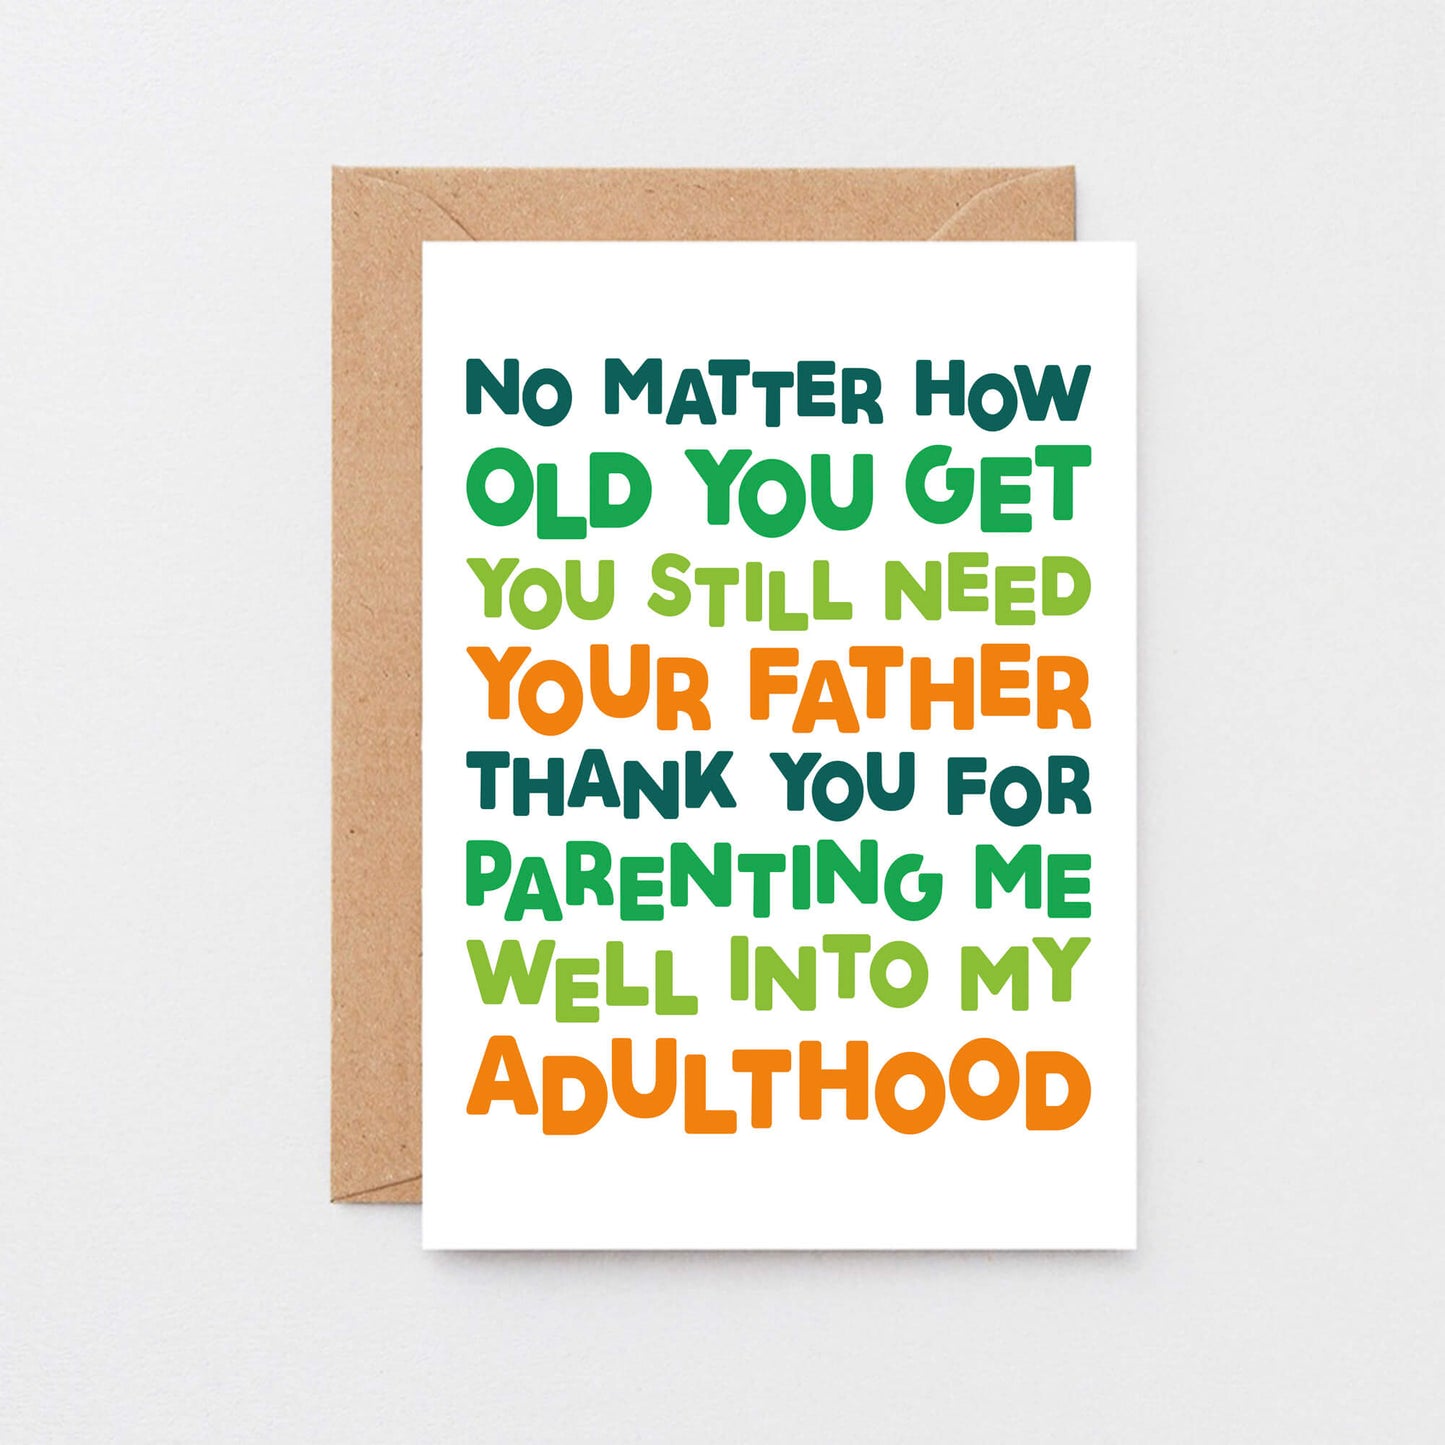 Dad Card by SixElevenCreations. Reads No matter how old you get you still need your father. Thank you for parenting me well into my adulthood. Product Code SE0711A6